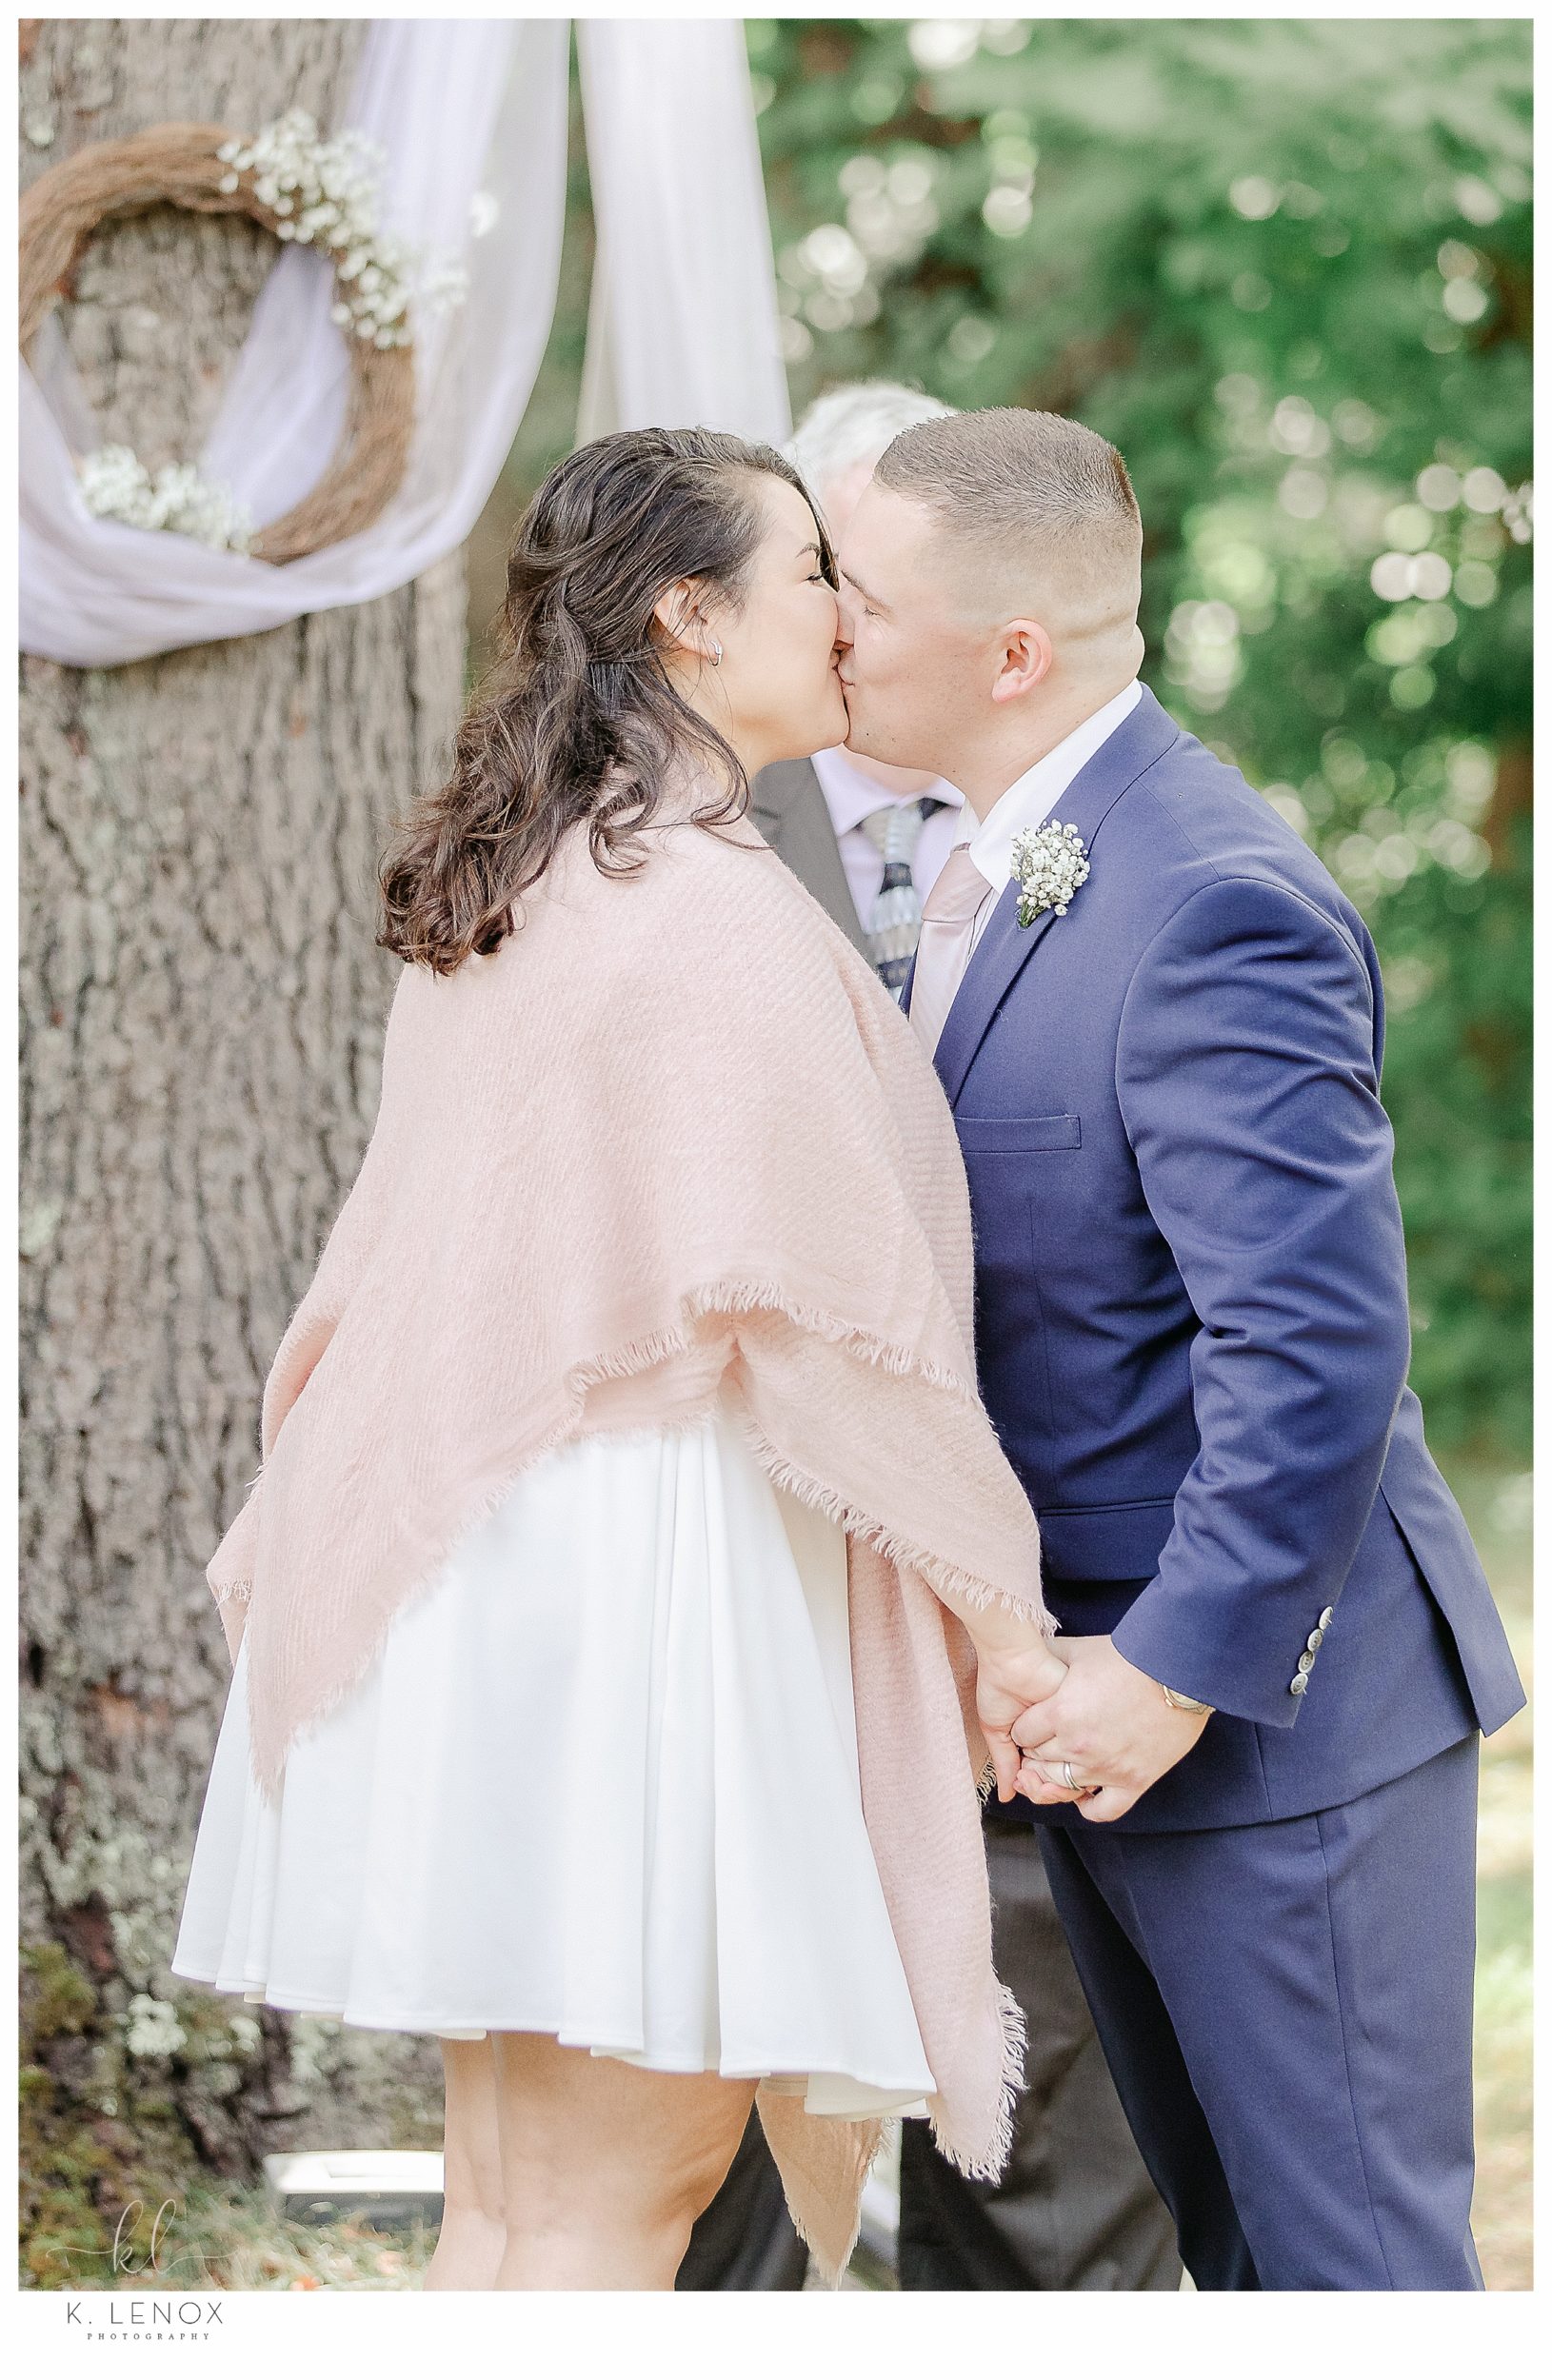 First kiss as husband and wife during their Light and Airy Backyard Elopement. 